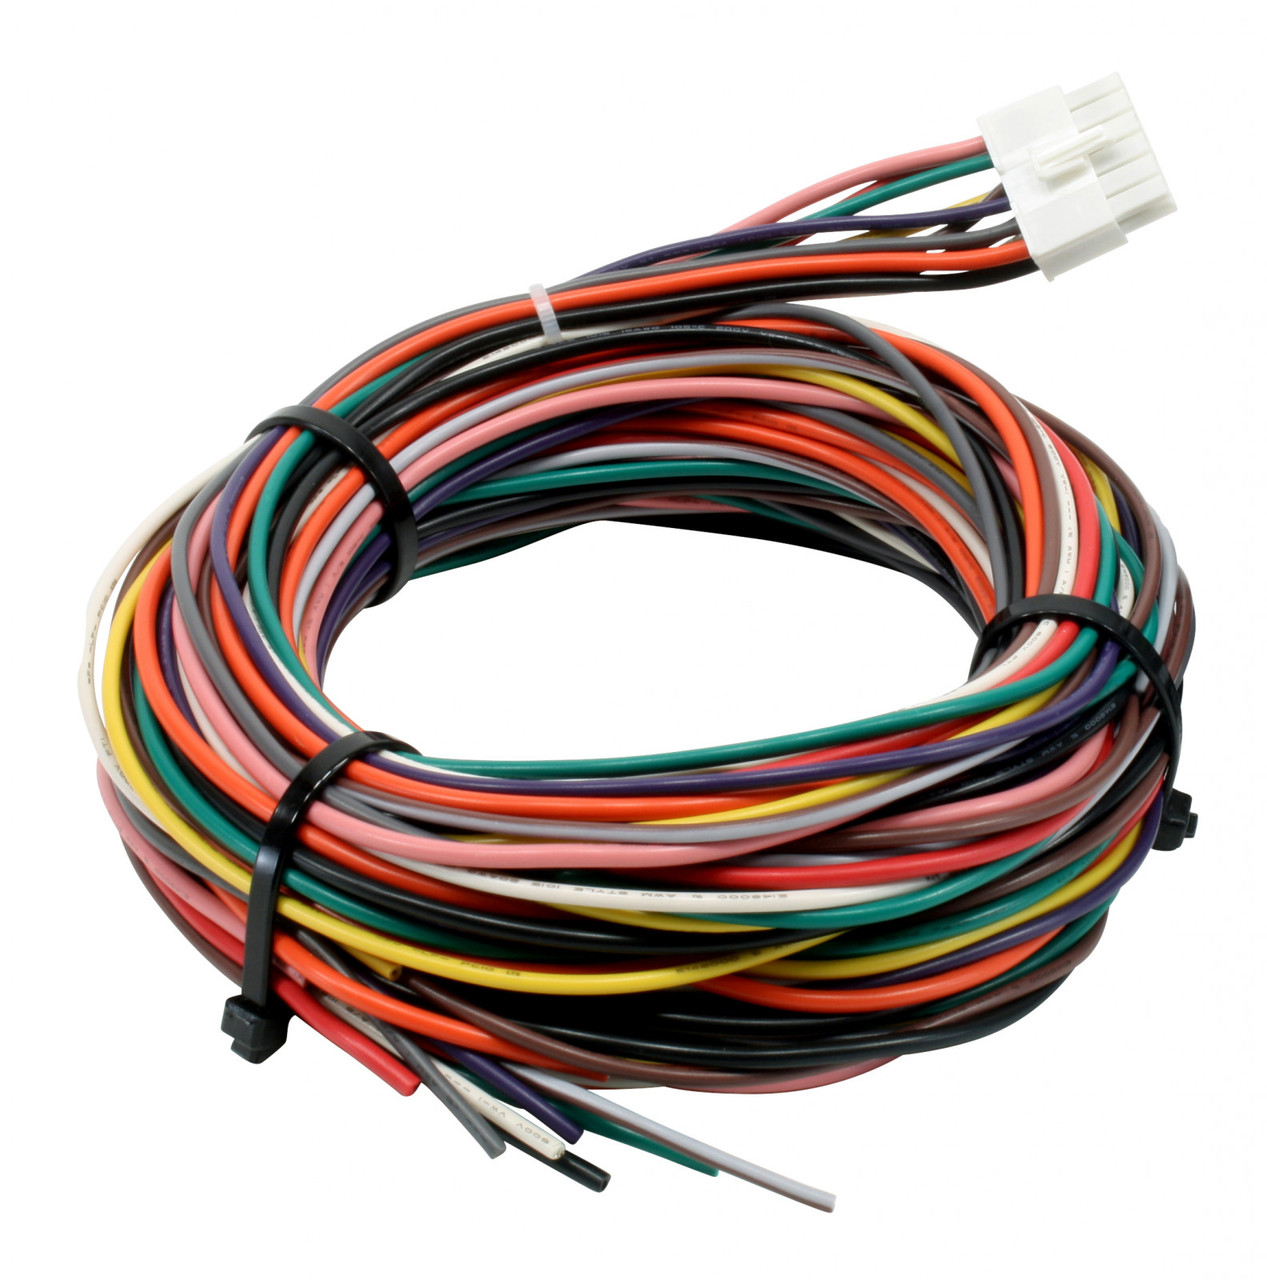 AEM Wiring Harness for V2 Controller with Multi Input (AEM-30-3324)